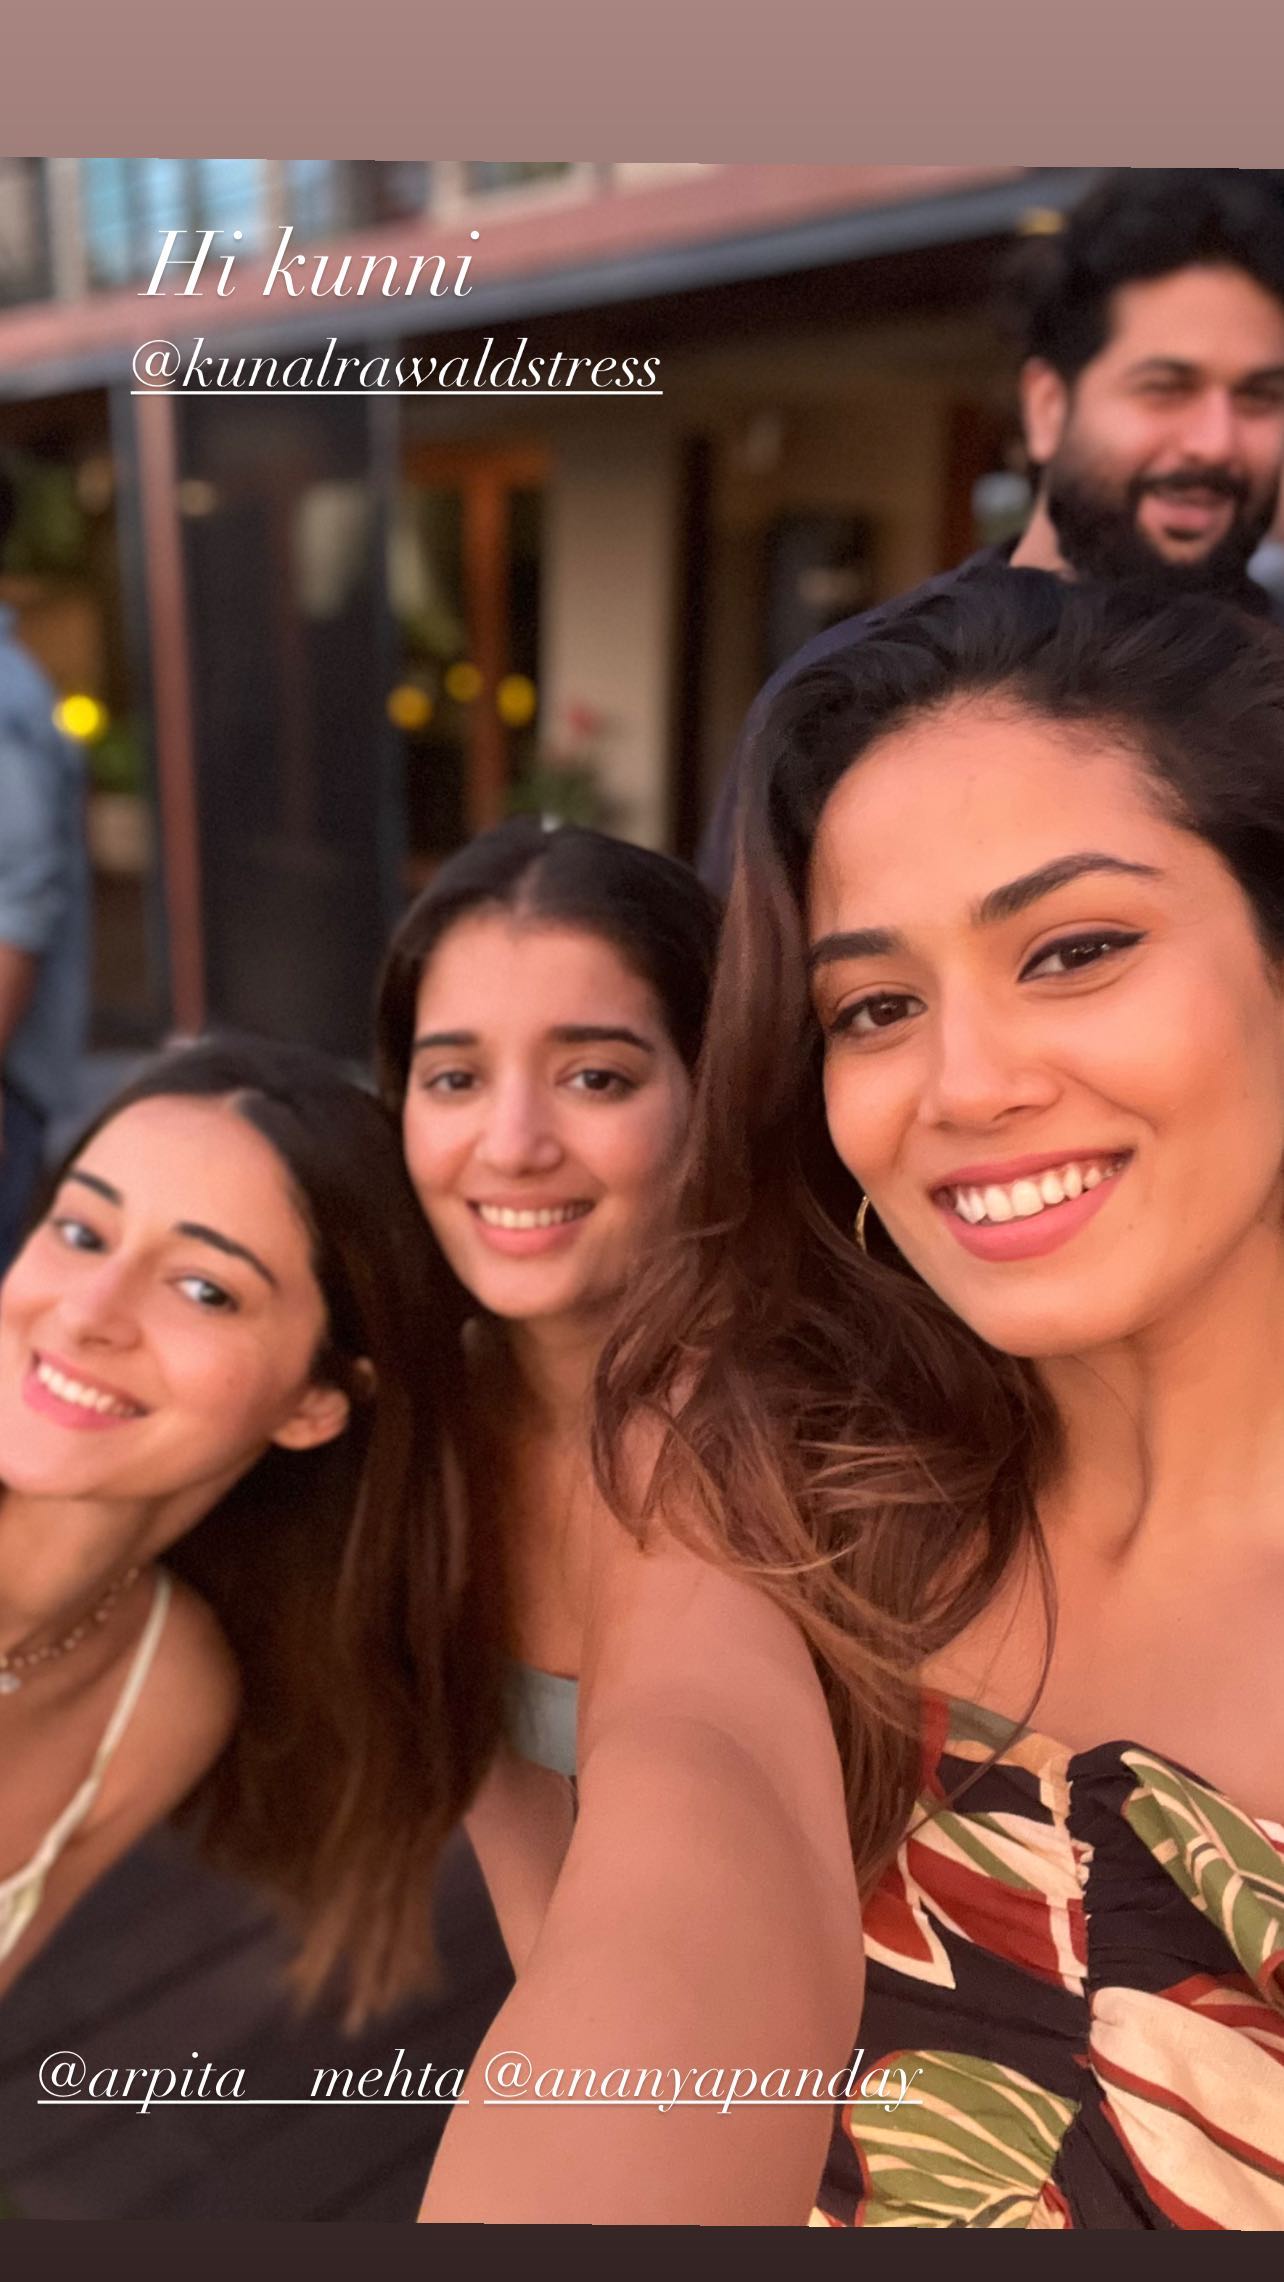 Mira Rajput poses with Ananya Panday and their friends.